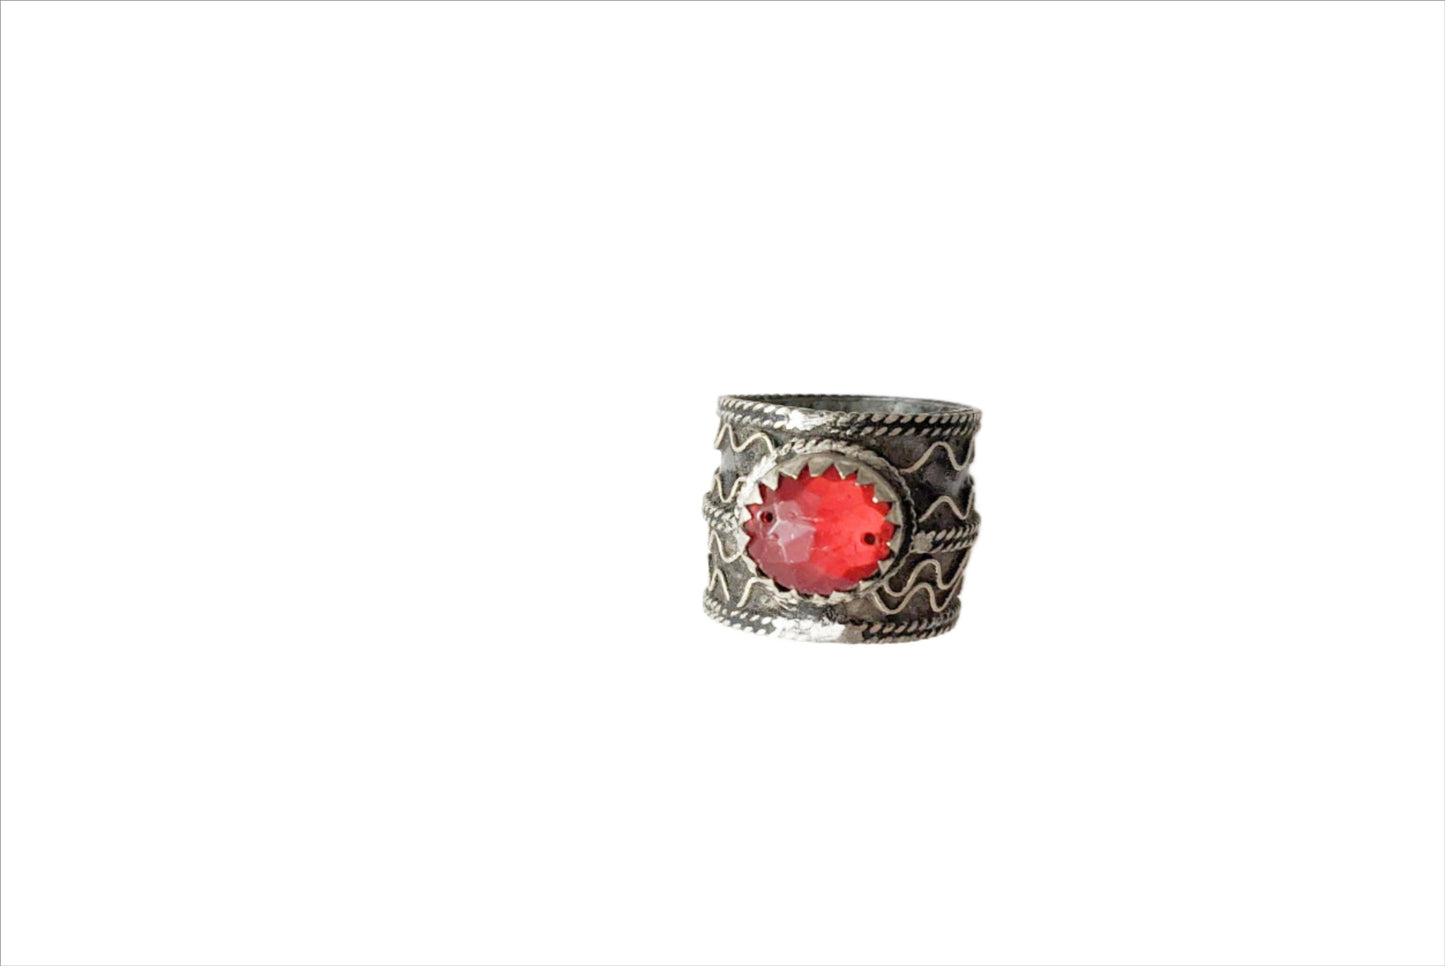 Vintage Moroccan Berber Hair Ring with Red Cabochon Size 11 - Anteeka